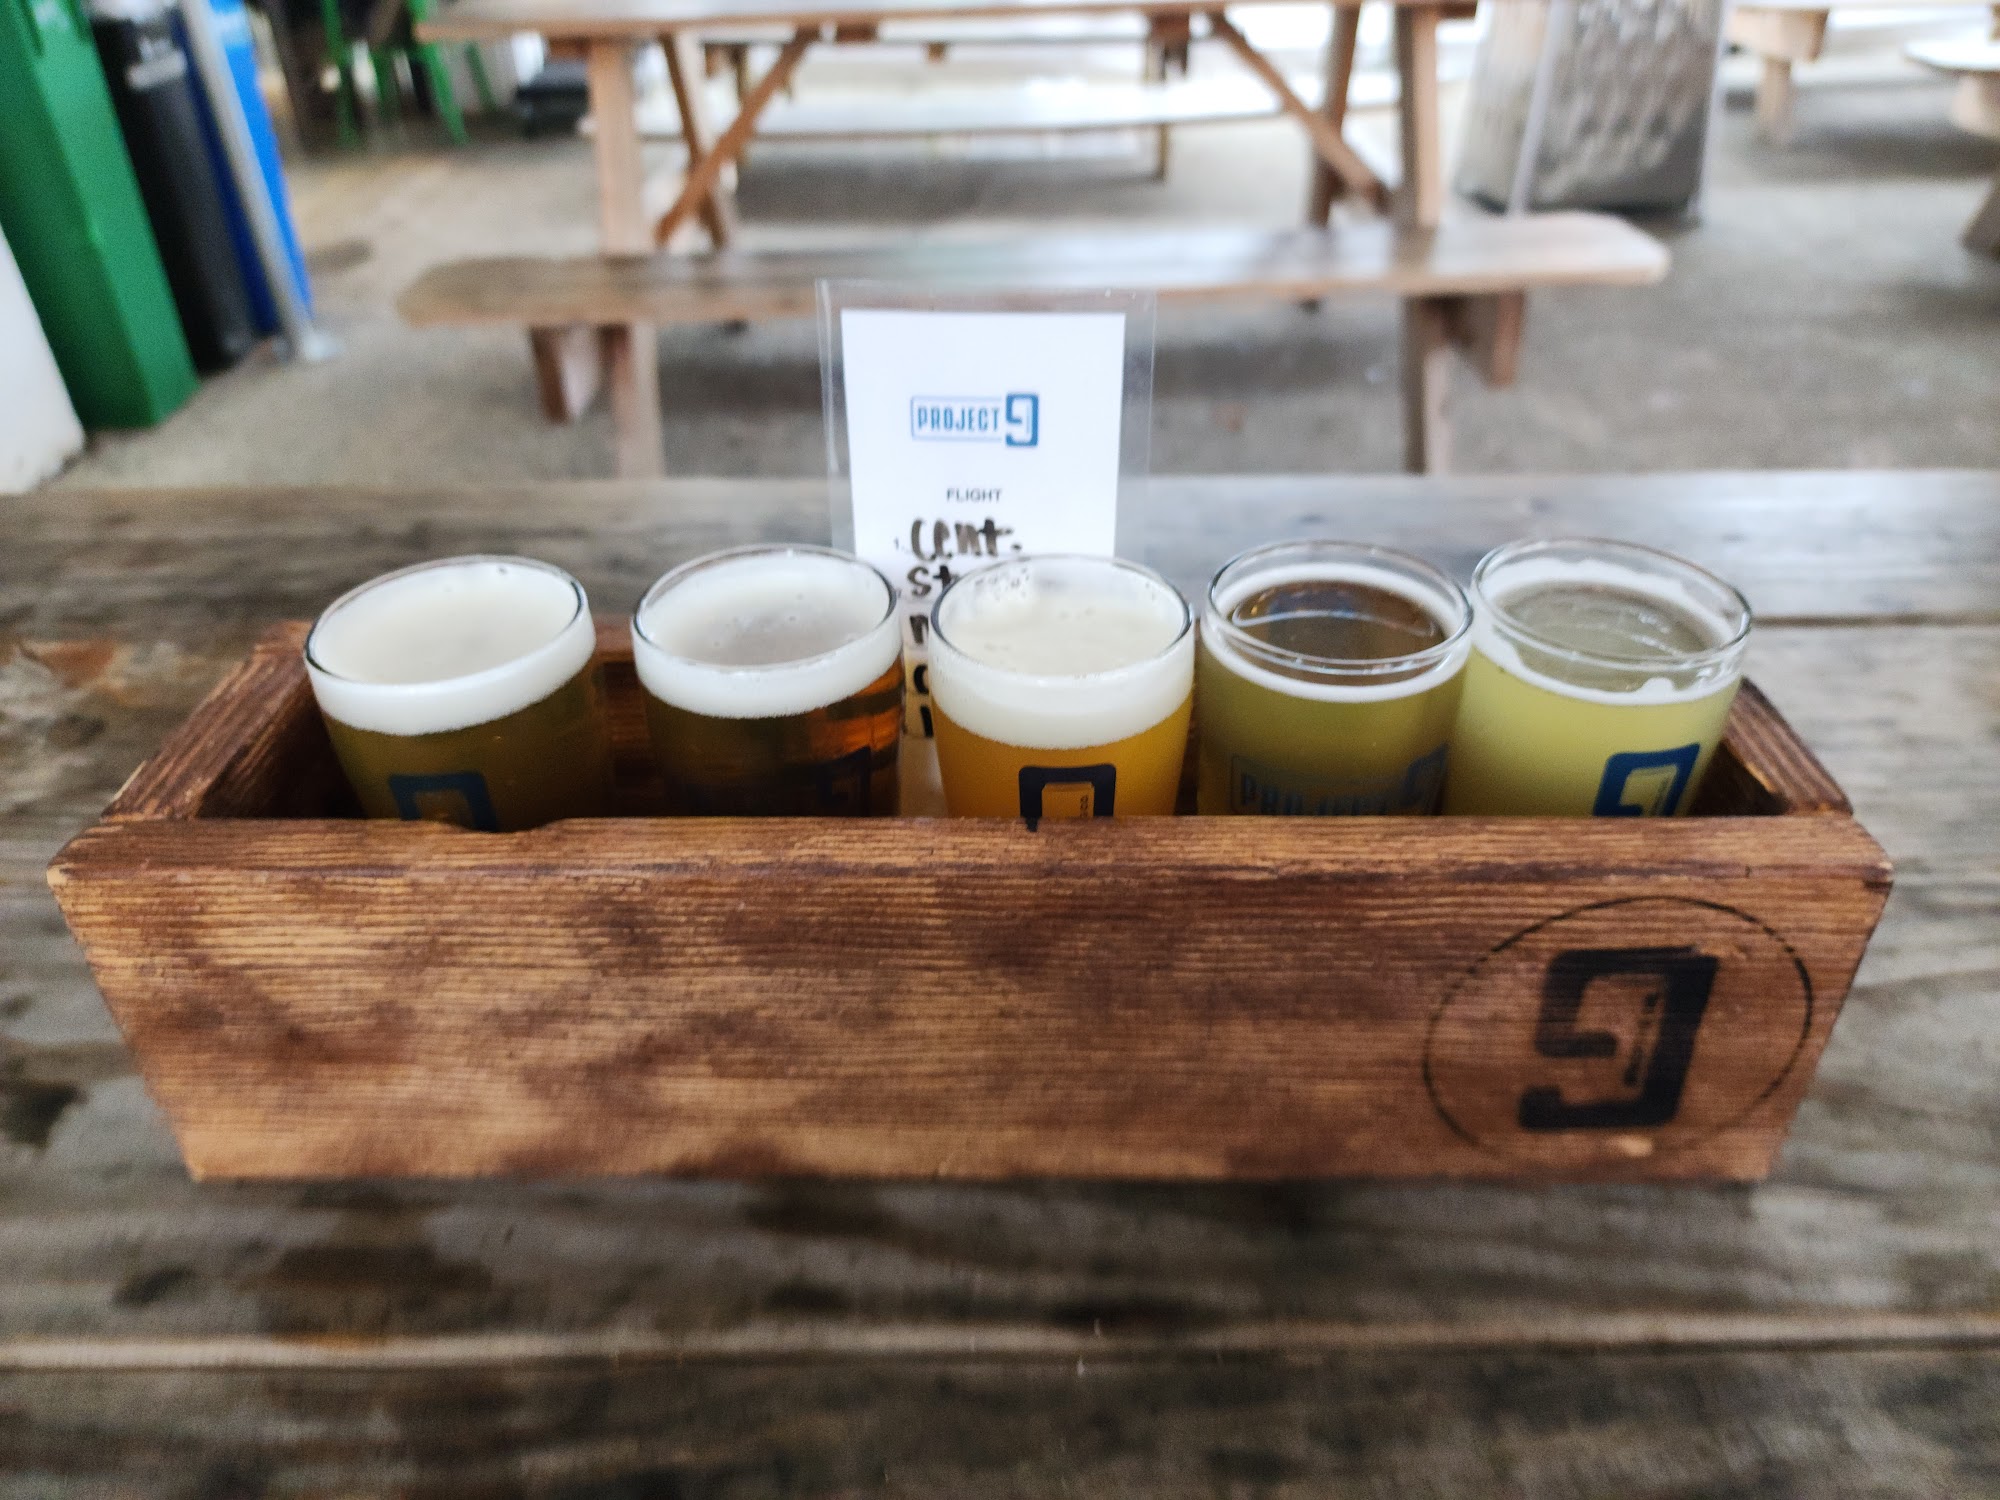 Project 9 Brewing Company